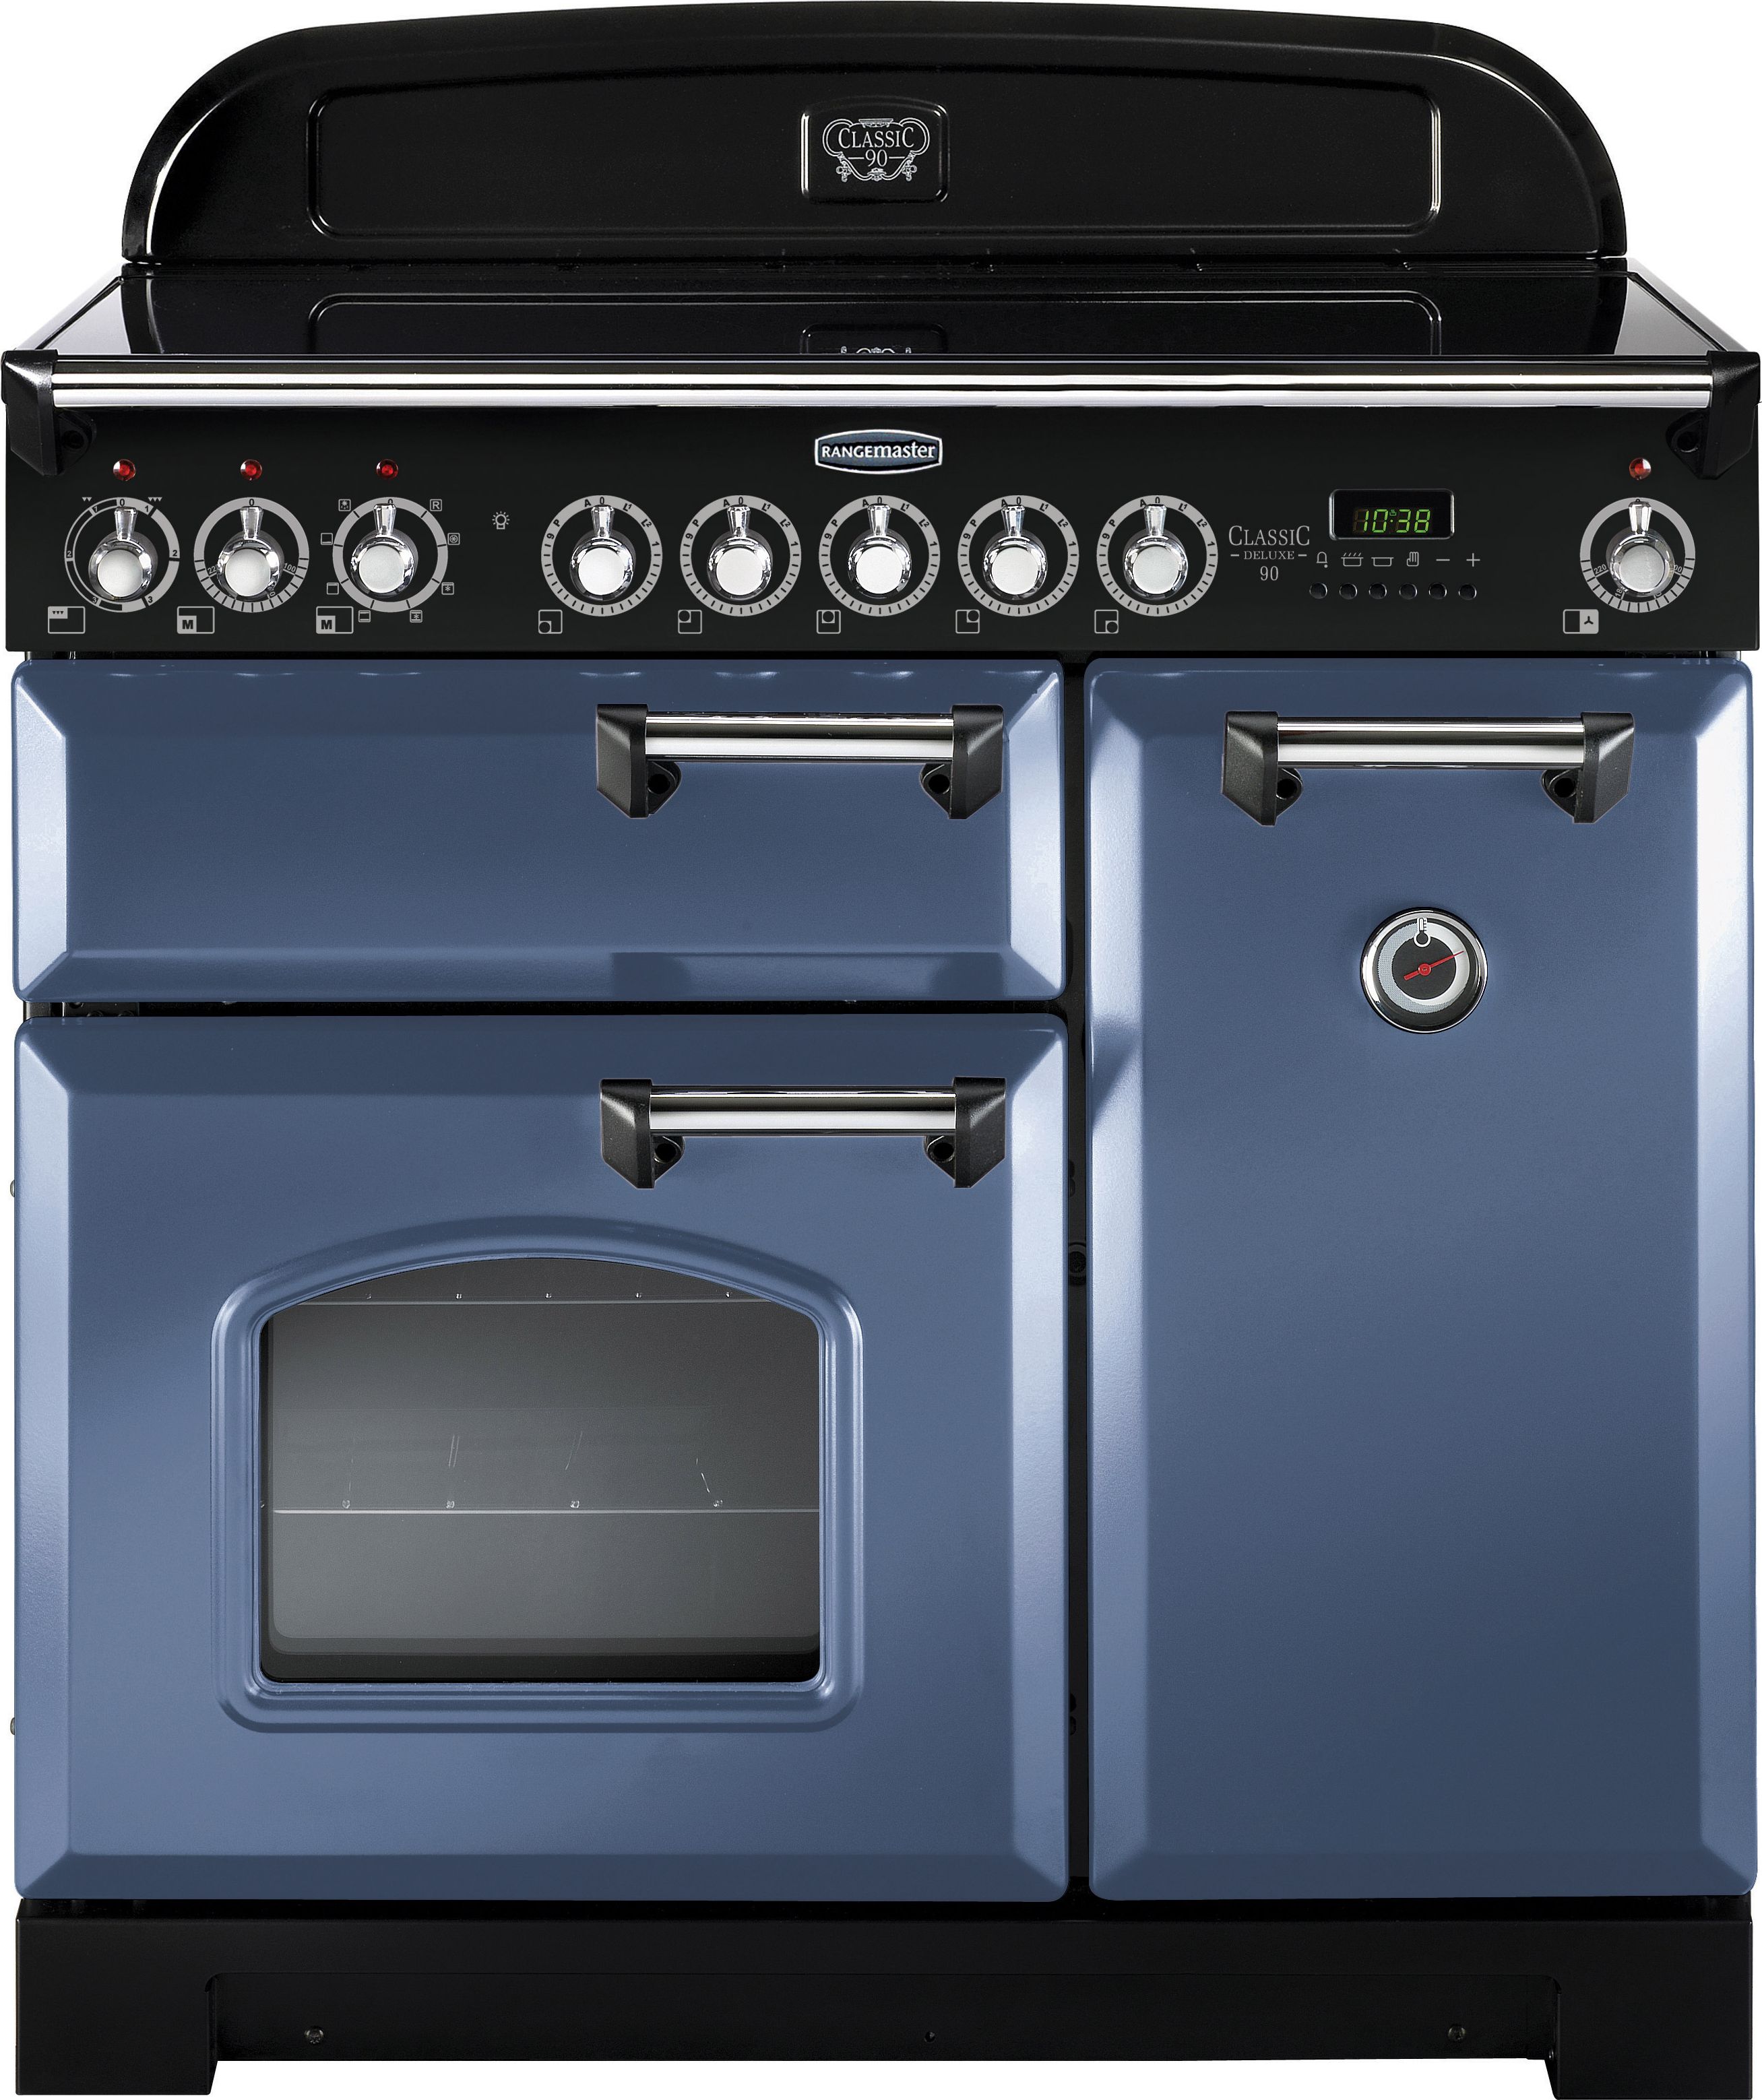 Rangemaster Classic Deluxe CDL90EISB/C 90cm Electric Range Cooker with Induction Hob - Stone Blue / Chrome - A/A Rated, Blue